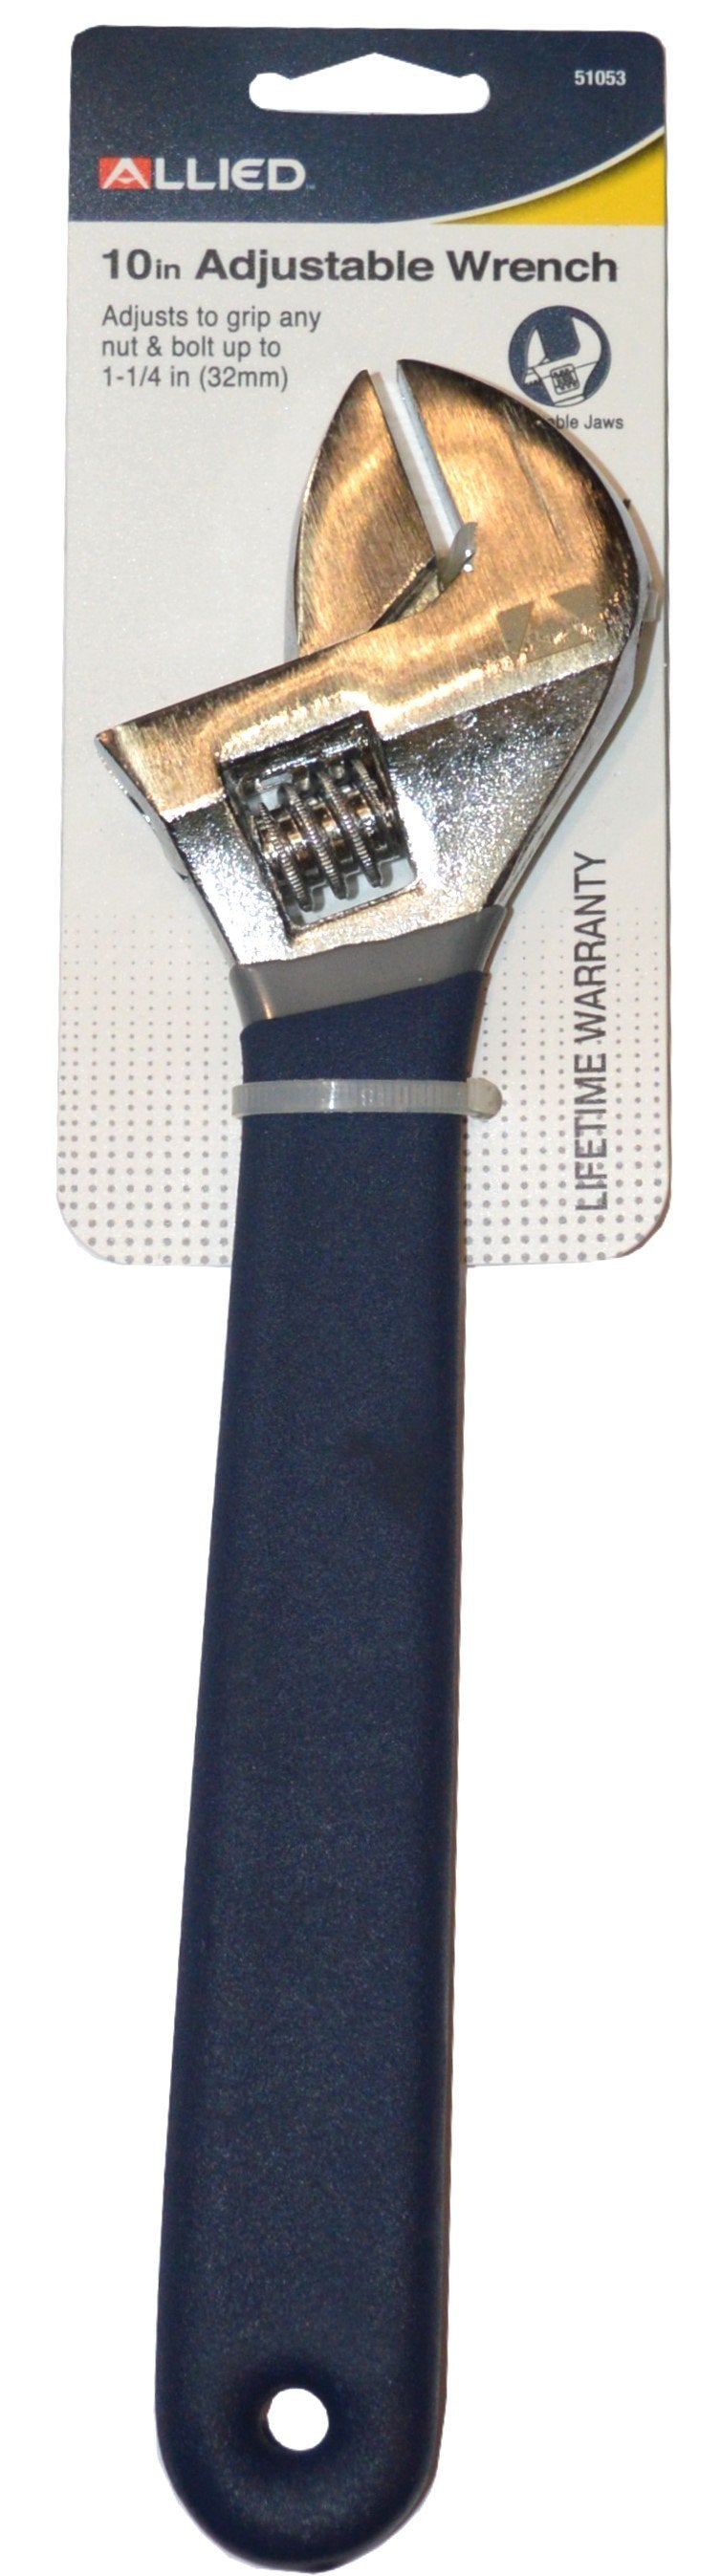 Adjustable Wrench #51053 250mm Allied